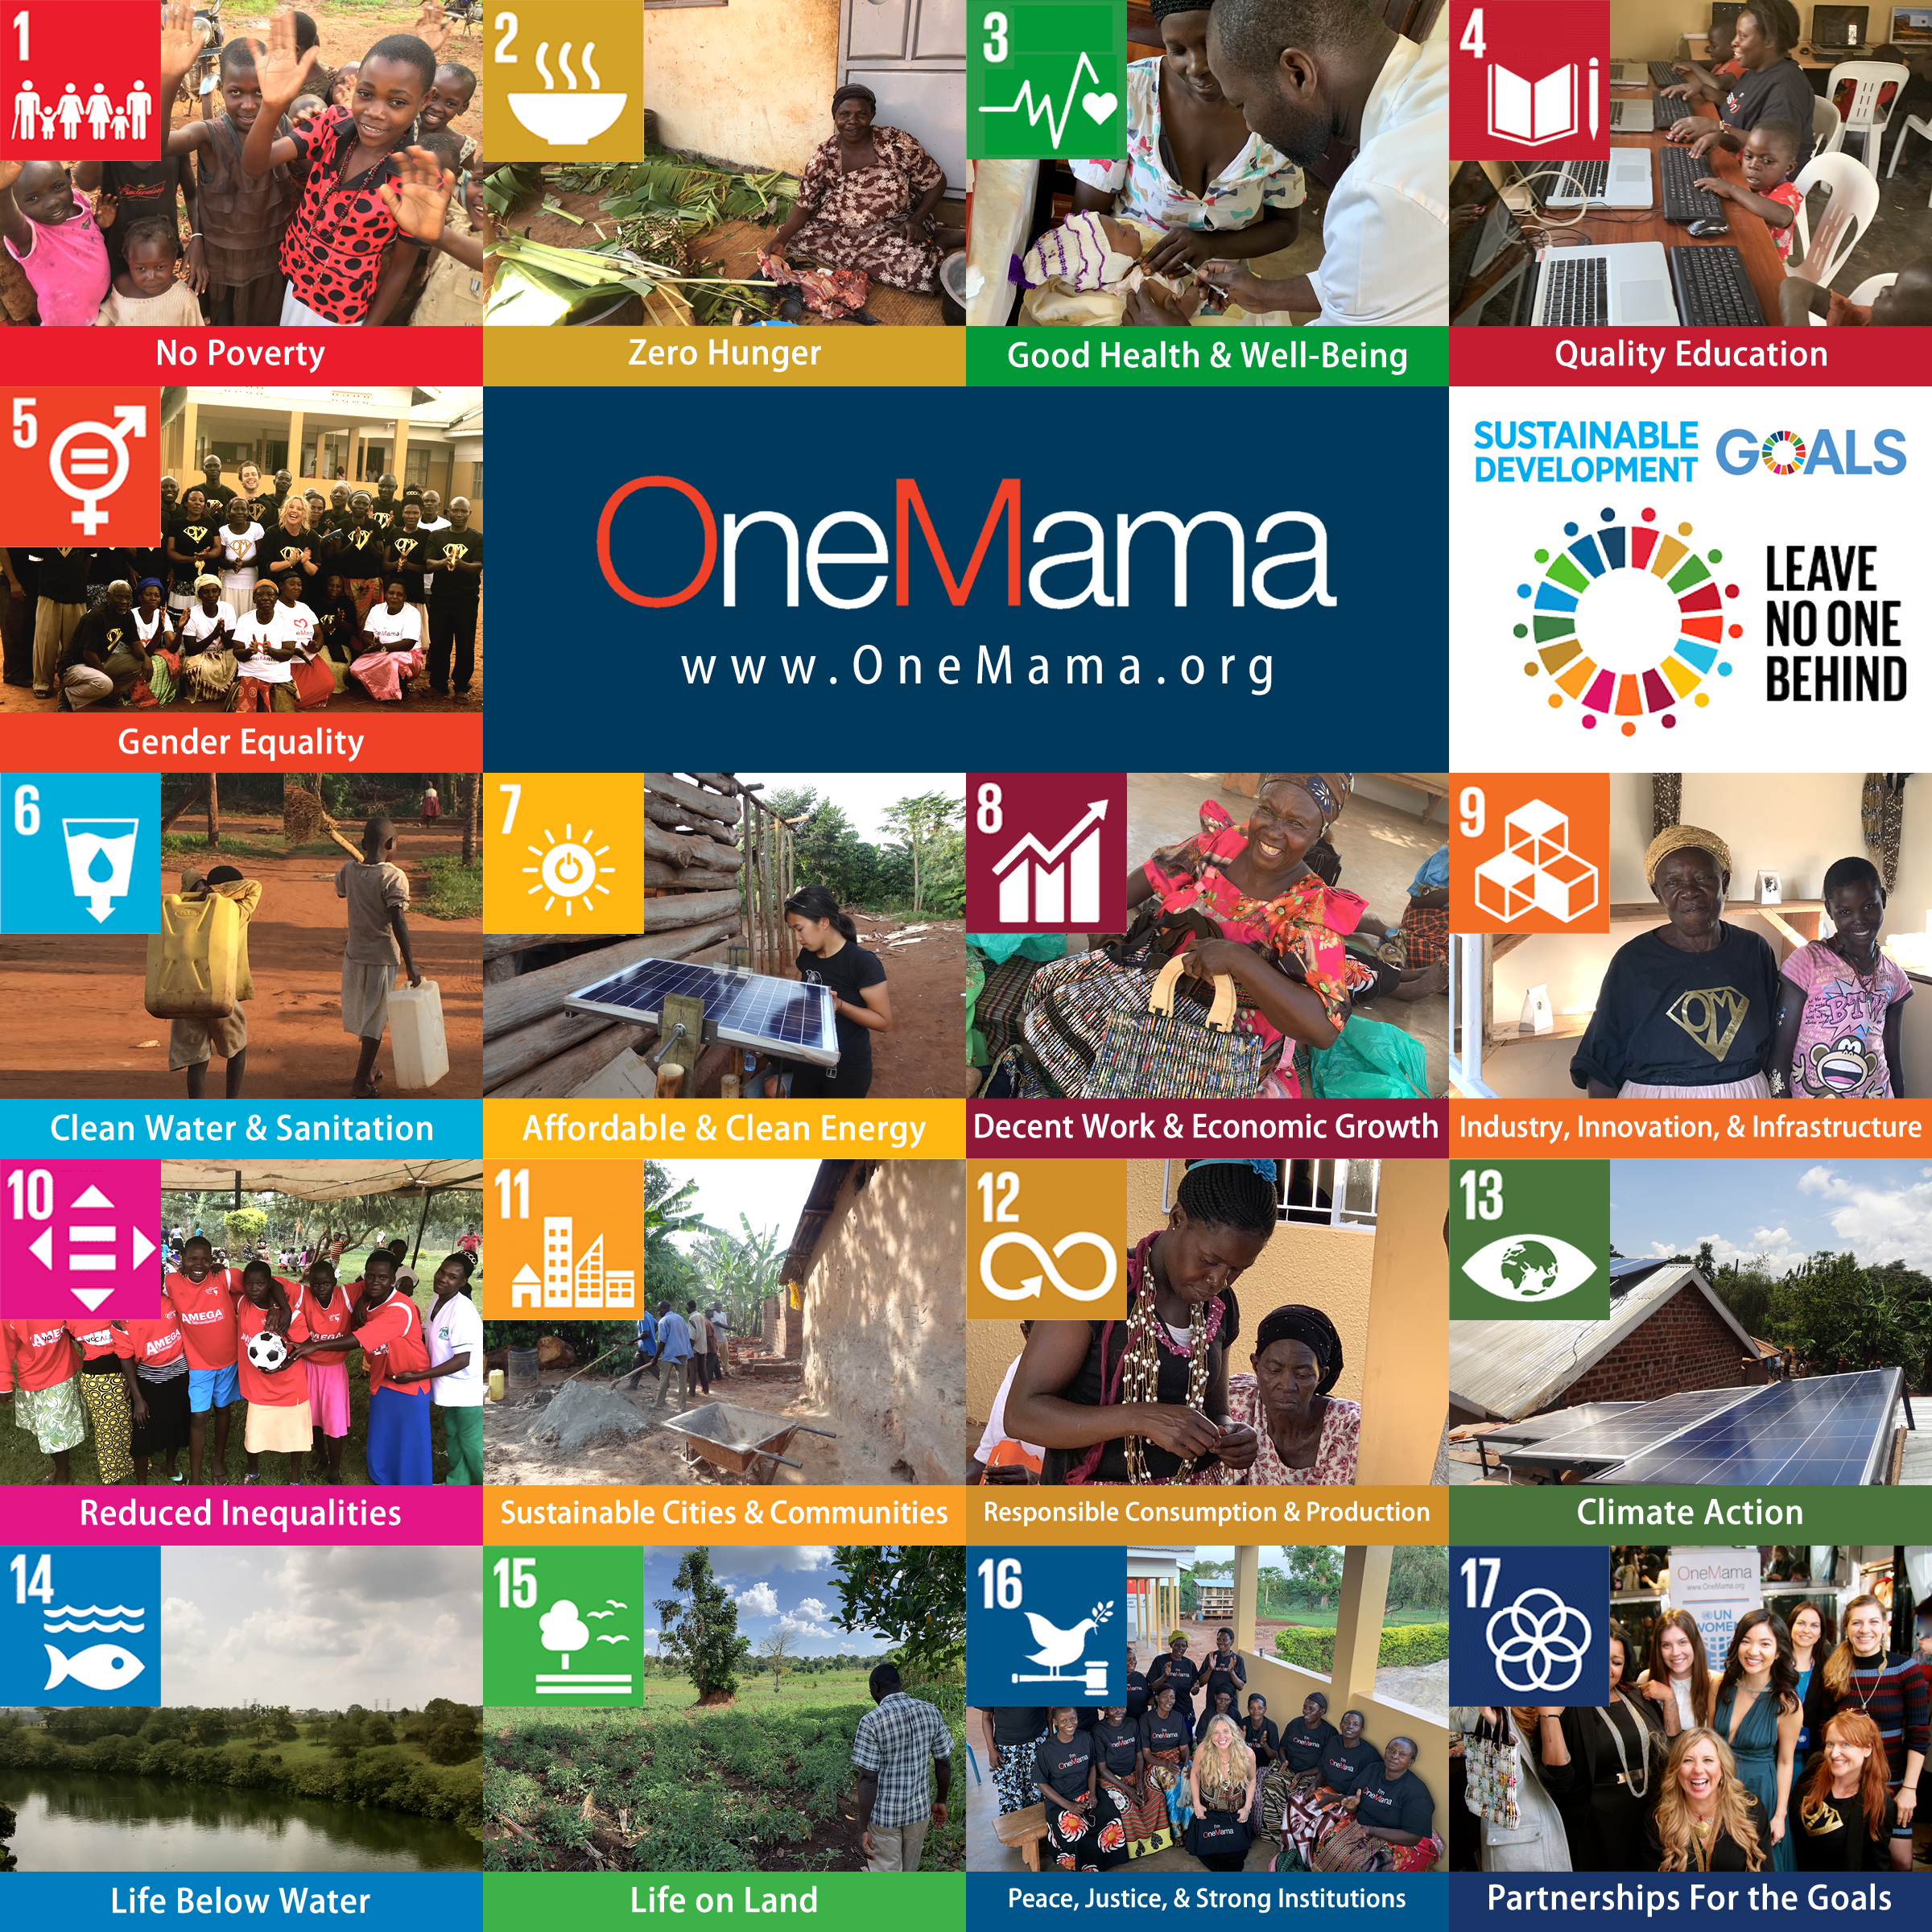 OneMama leads the way with the following Sustainable Development Goals